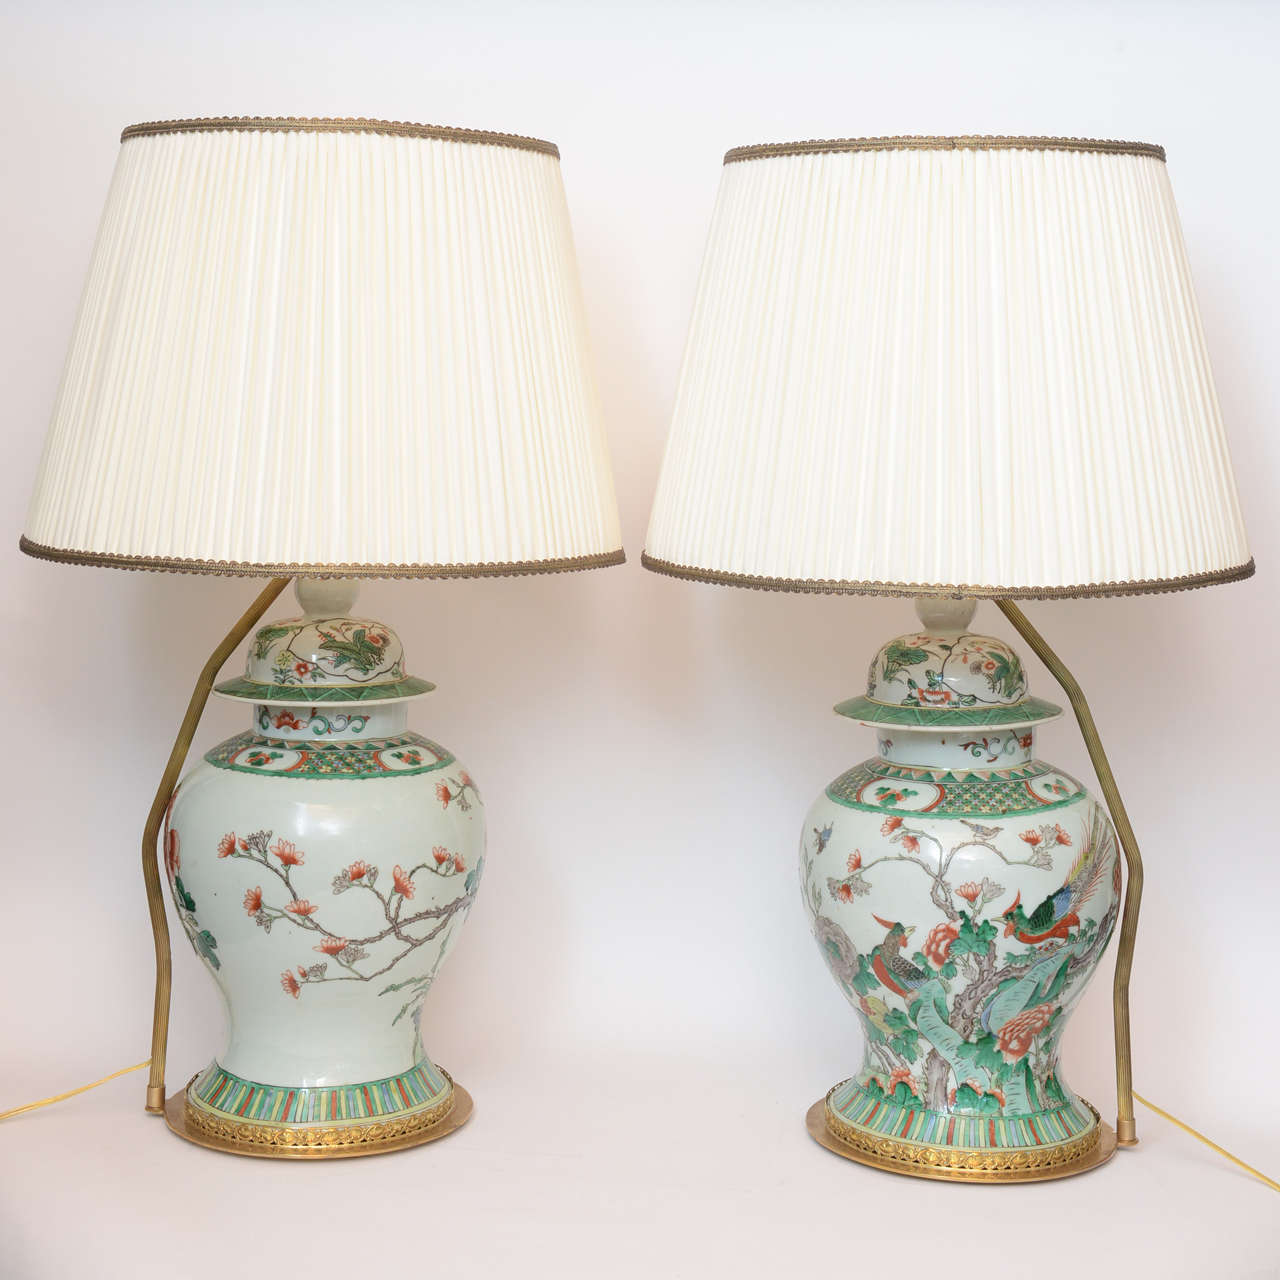 A pair of Chinese porcelain famille verte ginger jars with enamel paintings of birds and flowers and braches with blossoms. The vases aesthetically beautiful proportions and elegant, circa 1860.